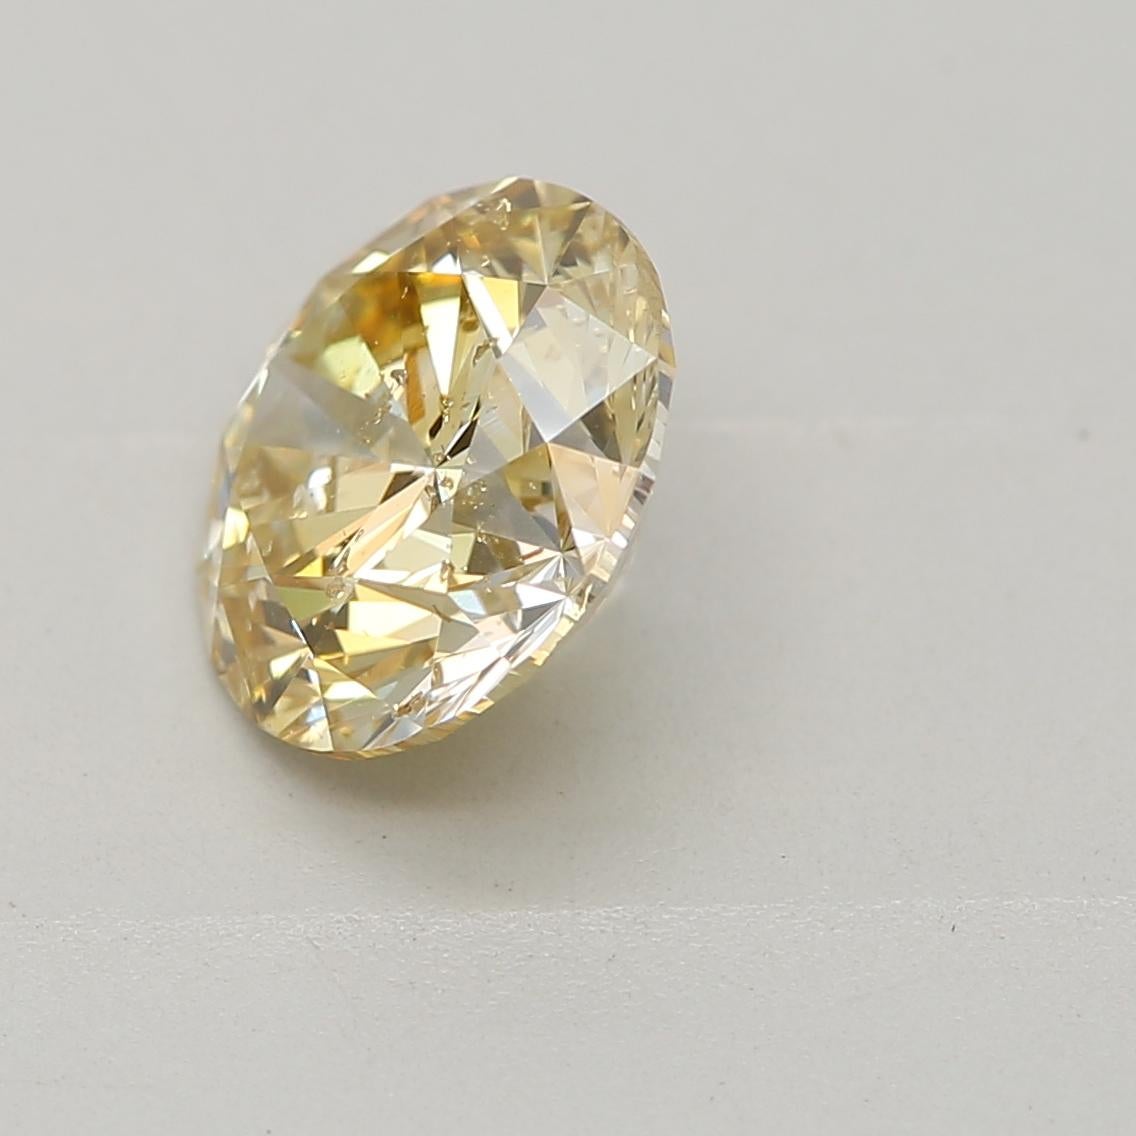 Round Cut 1.01-CARAT, FANCY BROWNISH YELLOW ROUND CUT DIAMOND I2 Clarity GIA Certified For Sale